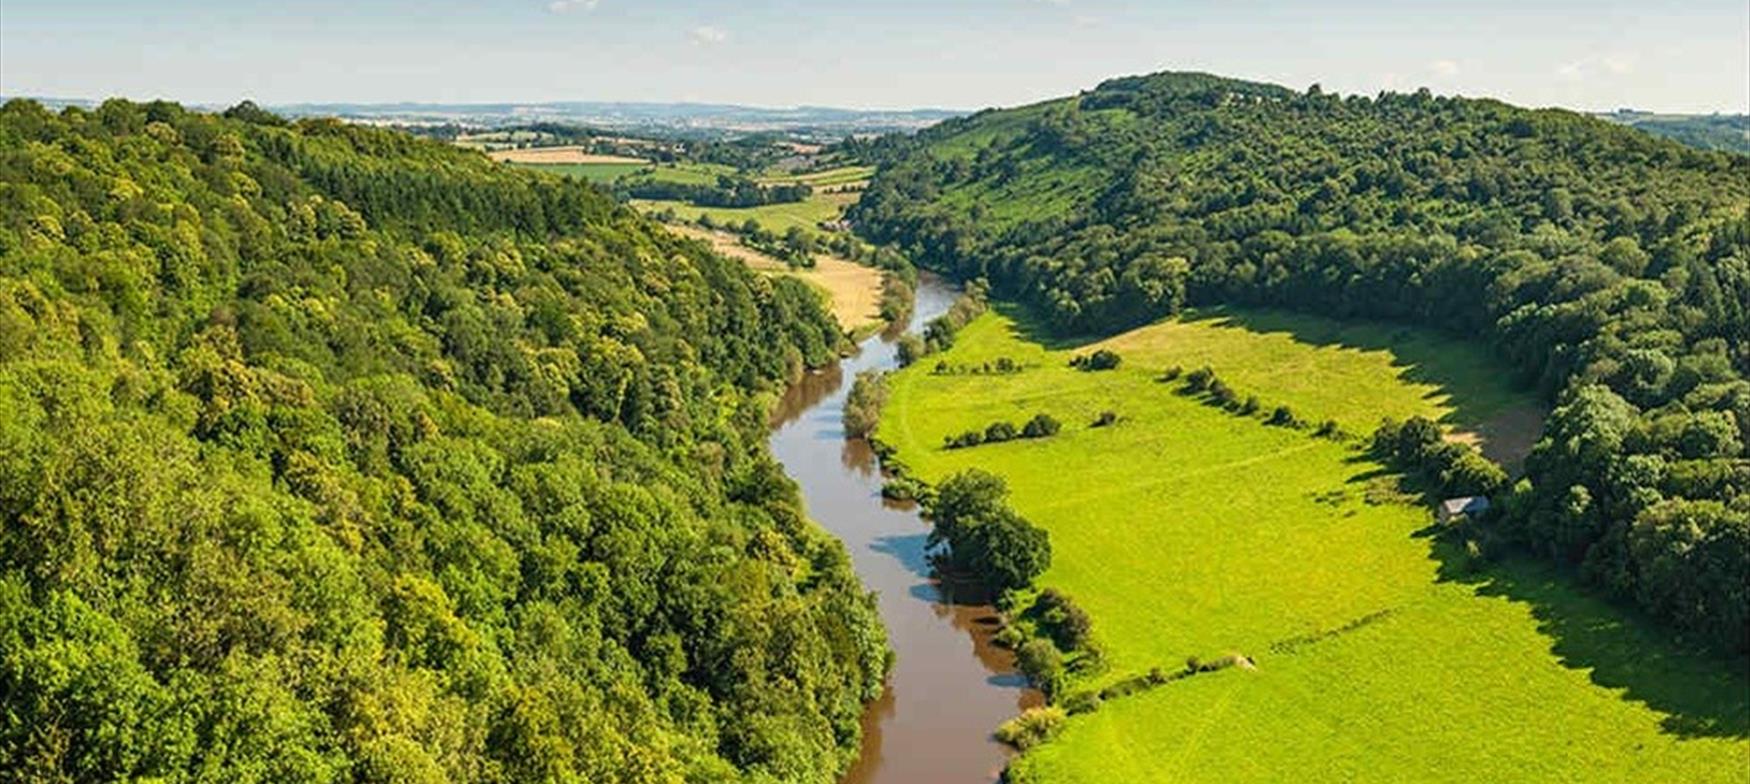 The Forest of Dean from above